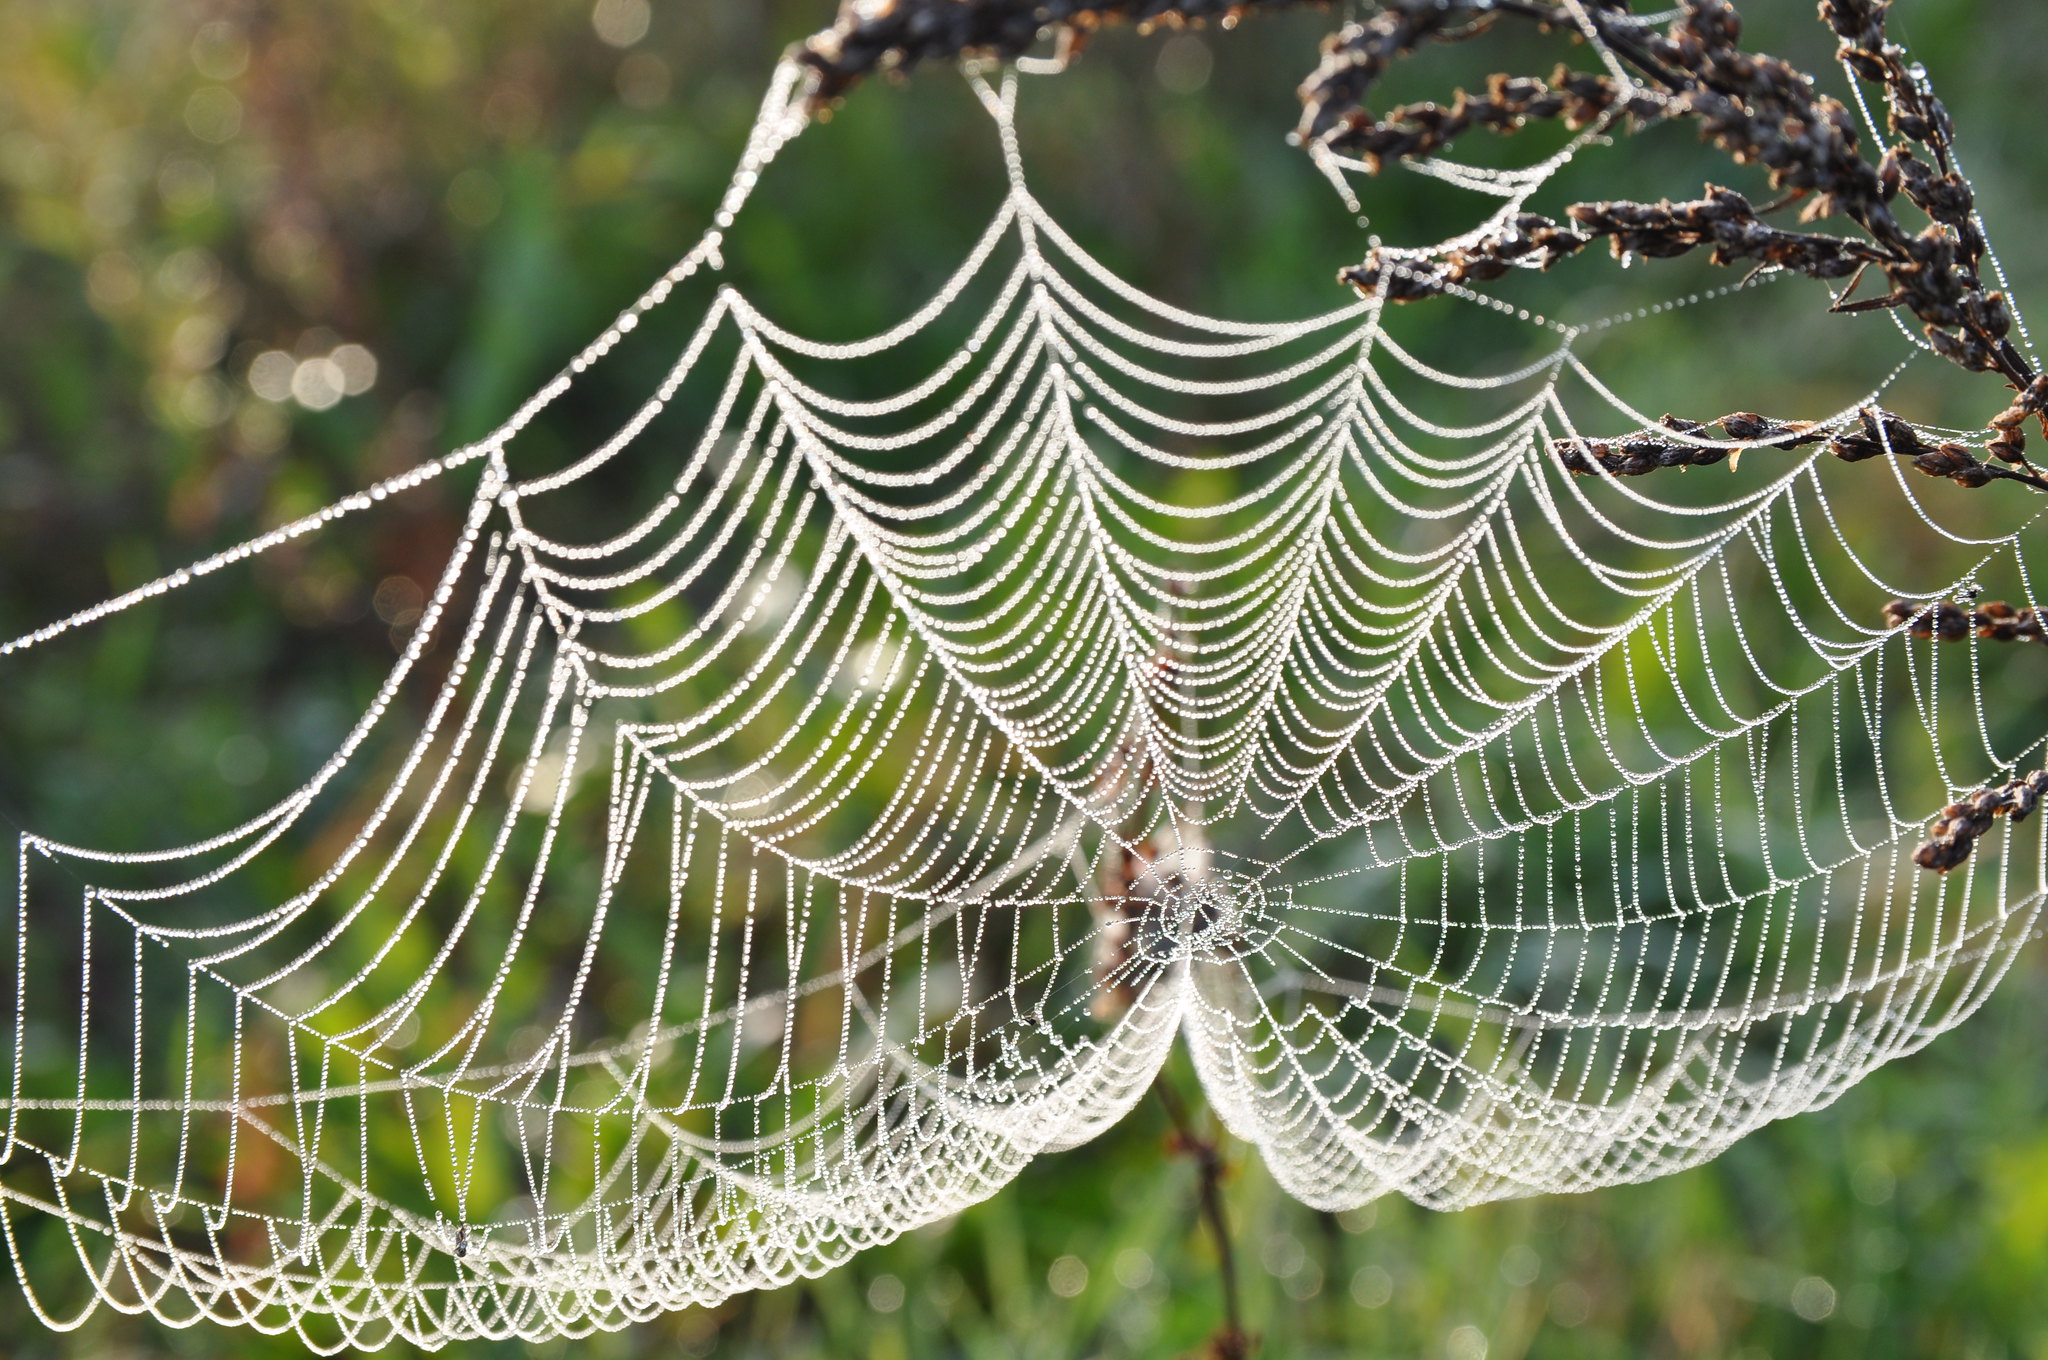 tangled-in-a-web-learn-about-spiders-chicago-public-library